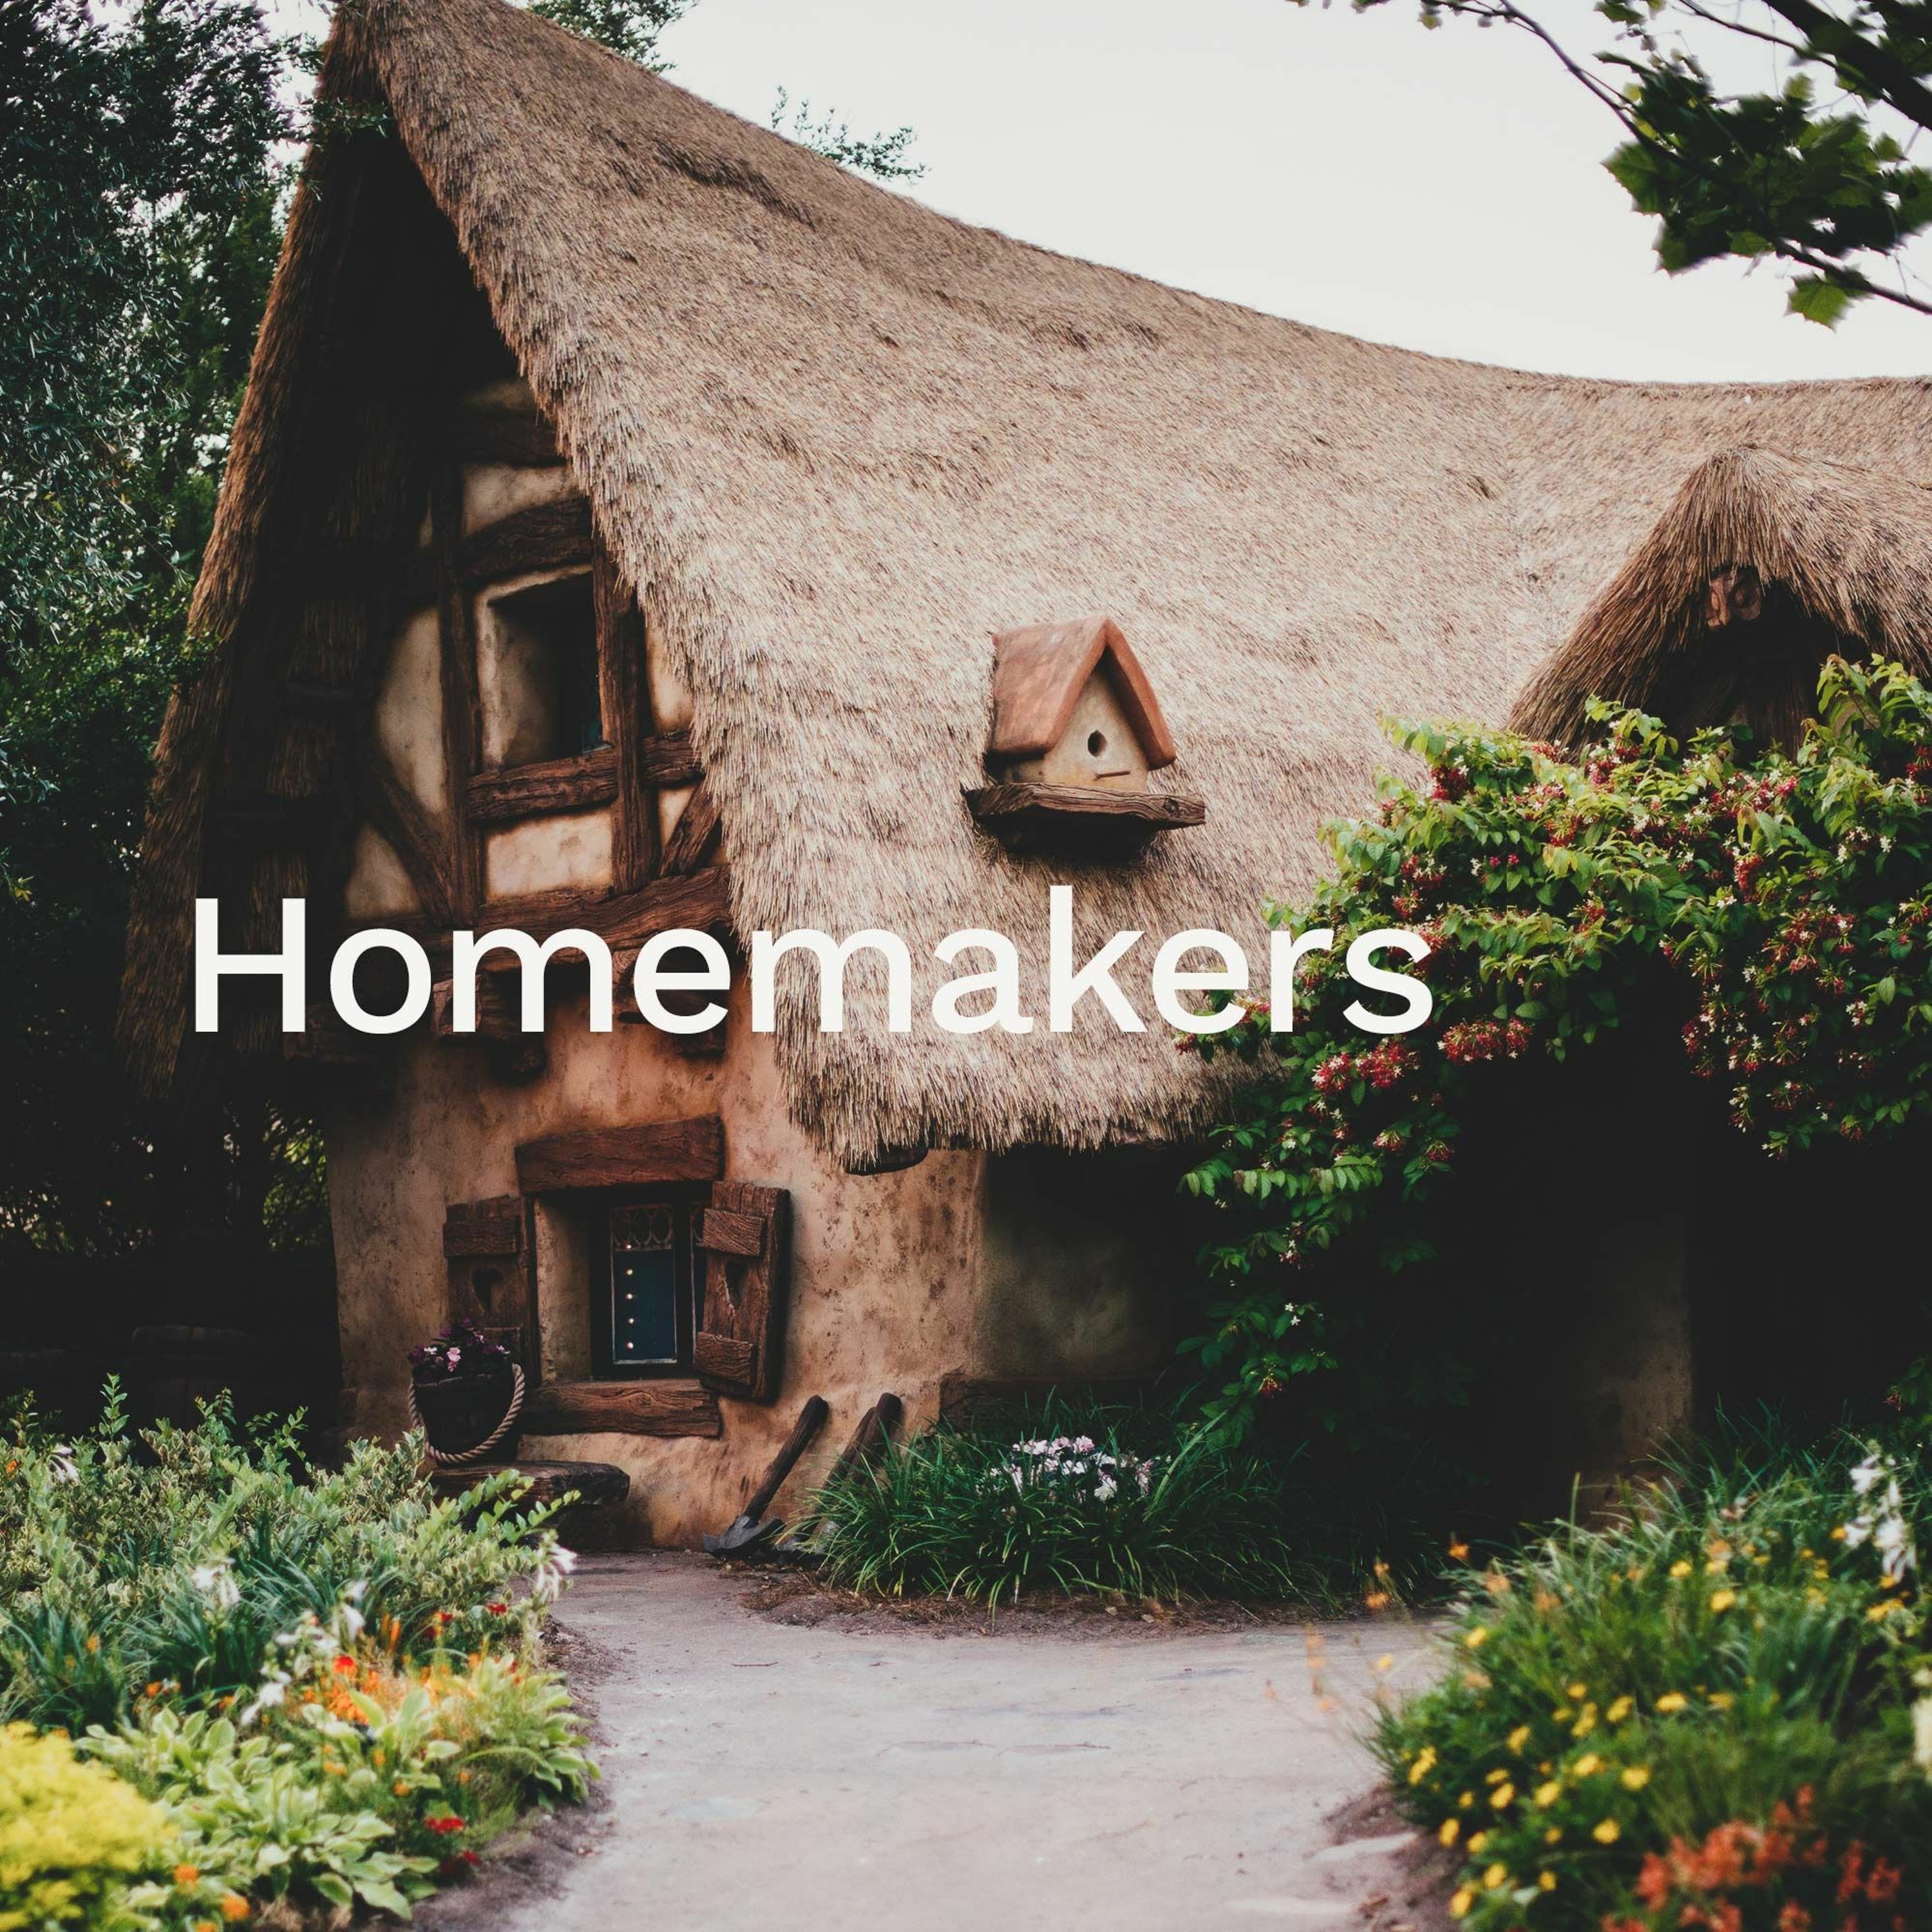 ’Homemakers’ / Amy Anderson